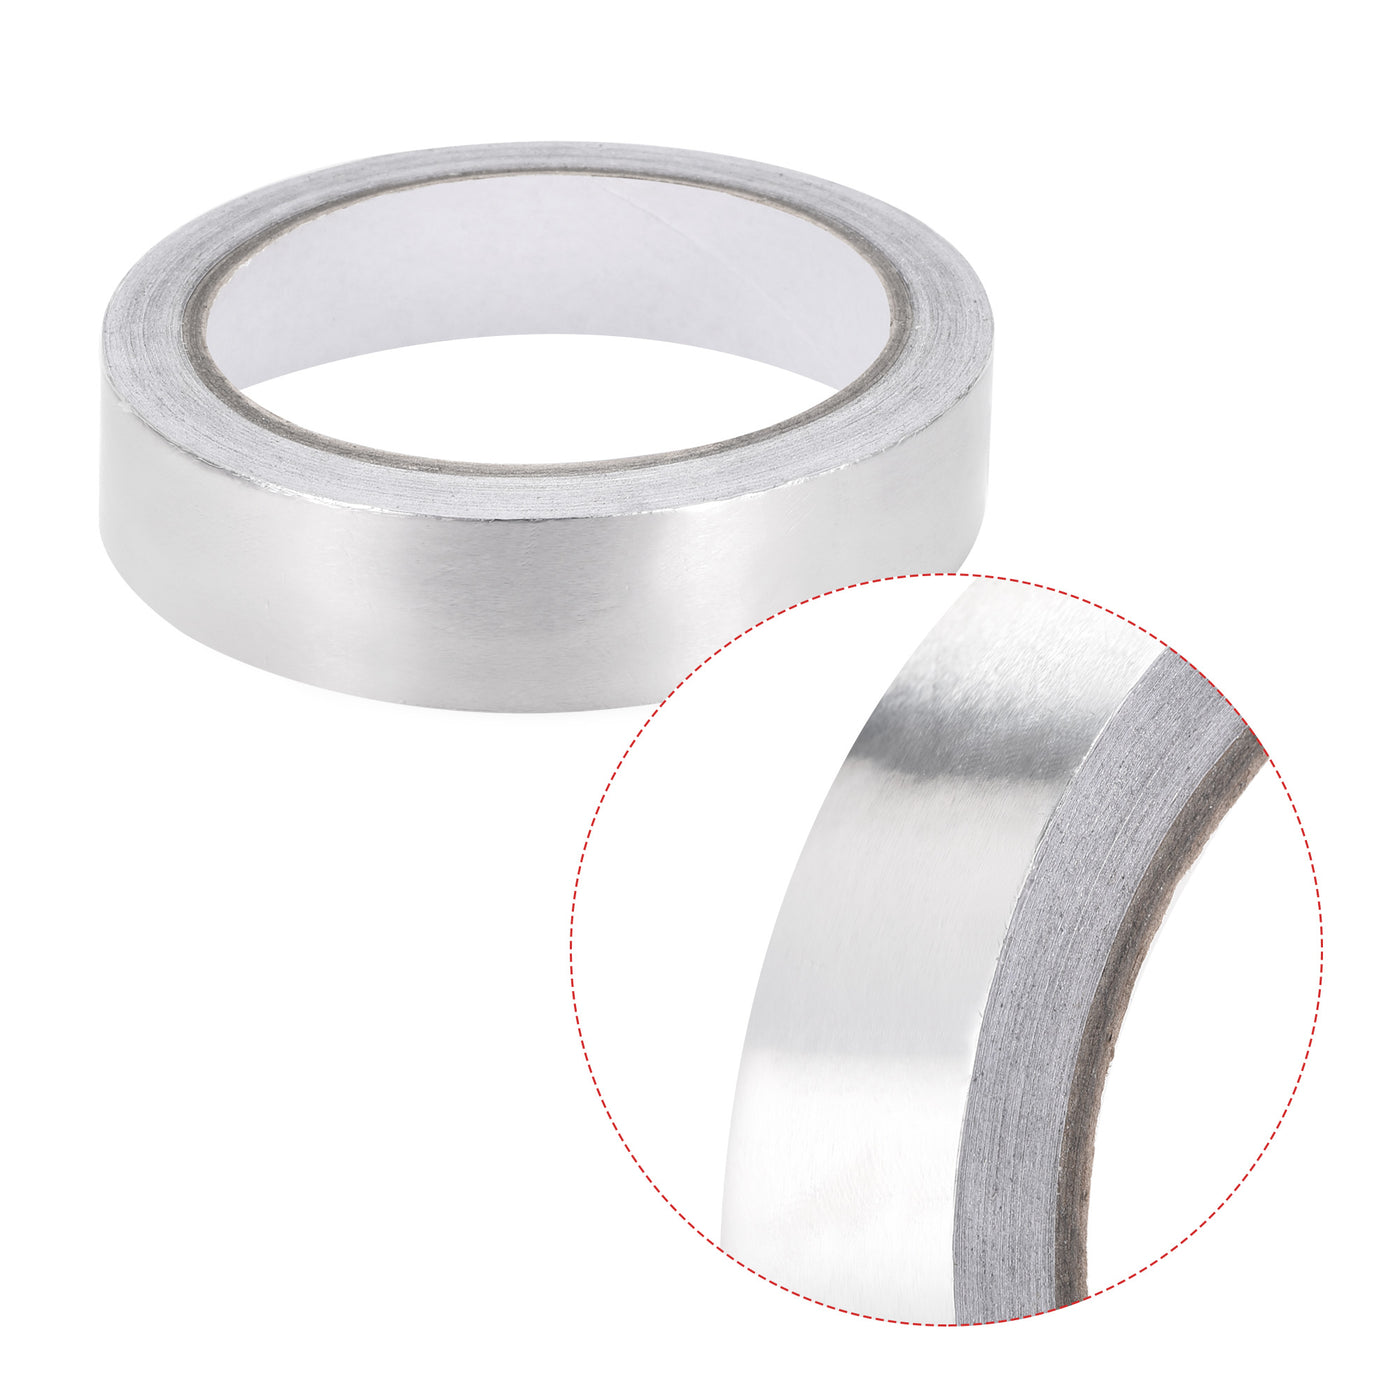 uxcell Uxcell 15mm Aluminum Foil Tape High Temperature Tape for HVAC, Sealing, Patching Hot and Cold Air Ducts Single Sided Adhesive Tape 20m/65ft